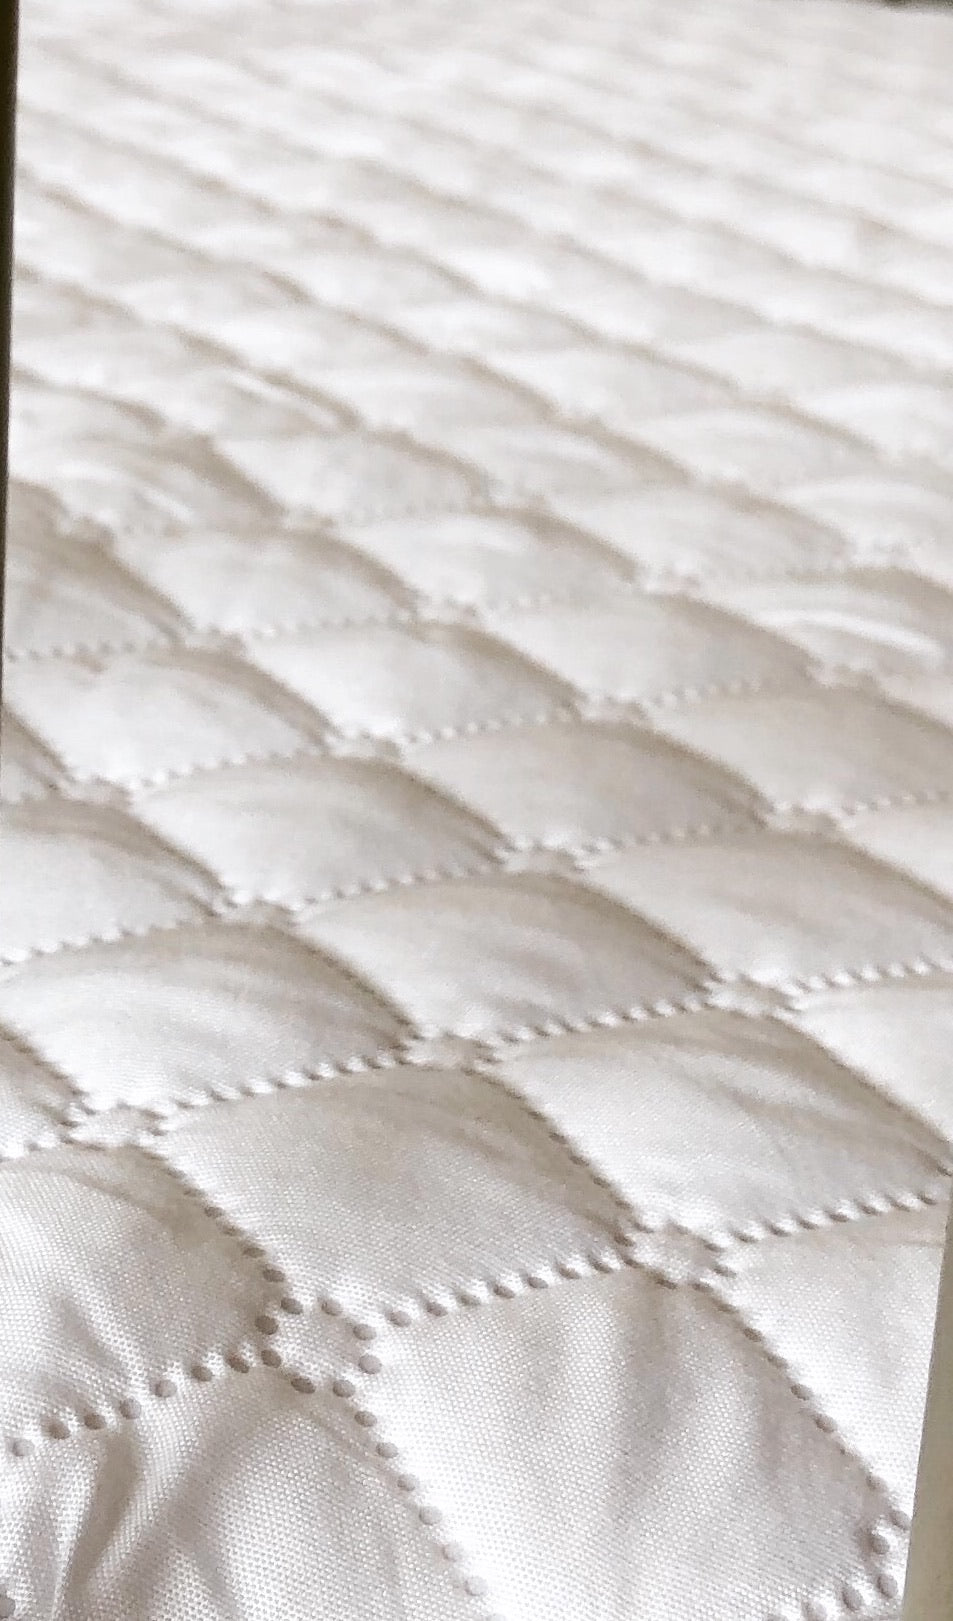 To fit Stokke Junior Bed waterproof quilted mattress protector